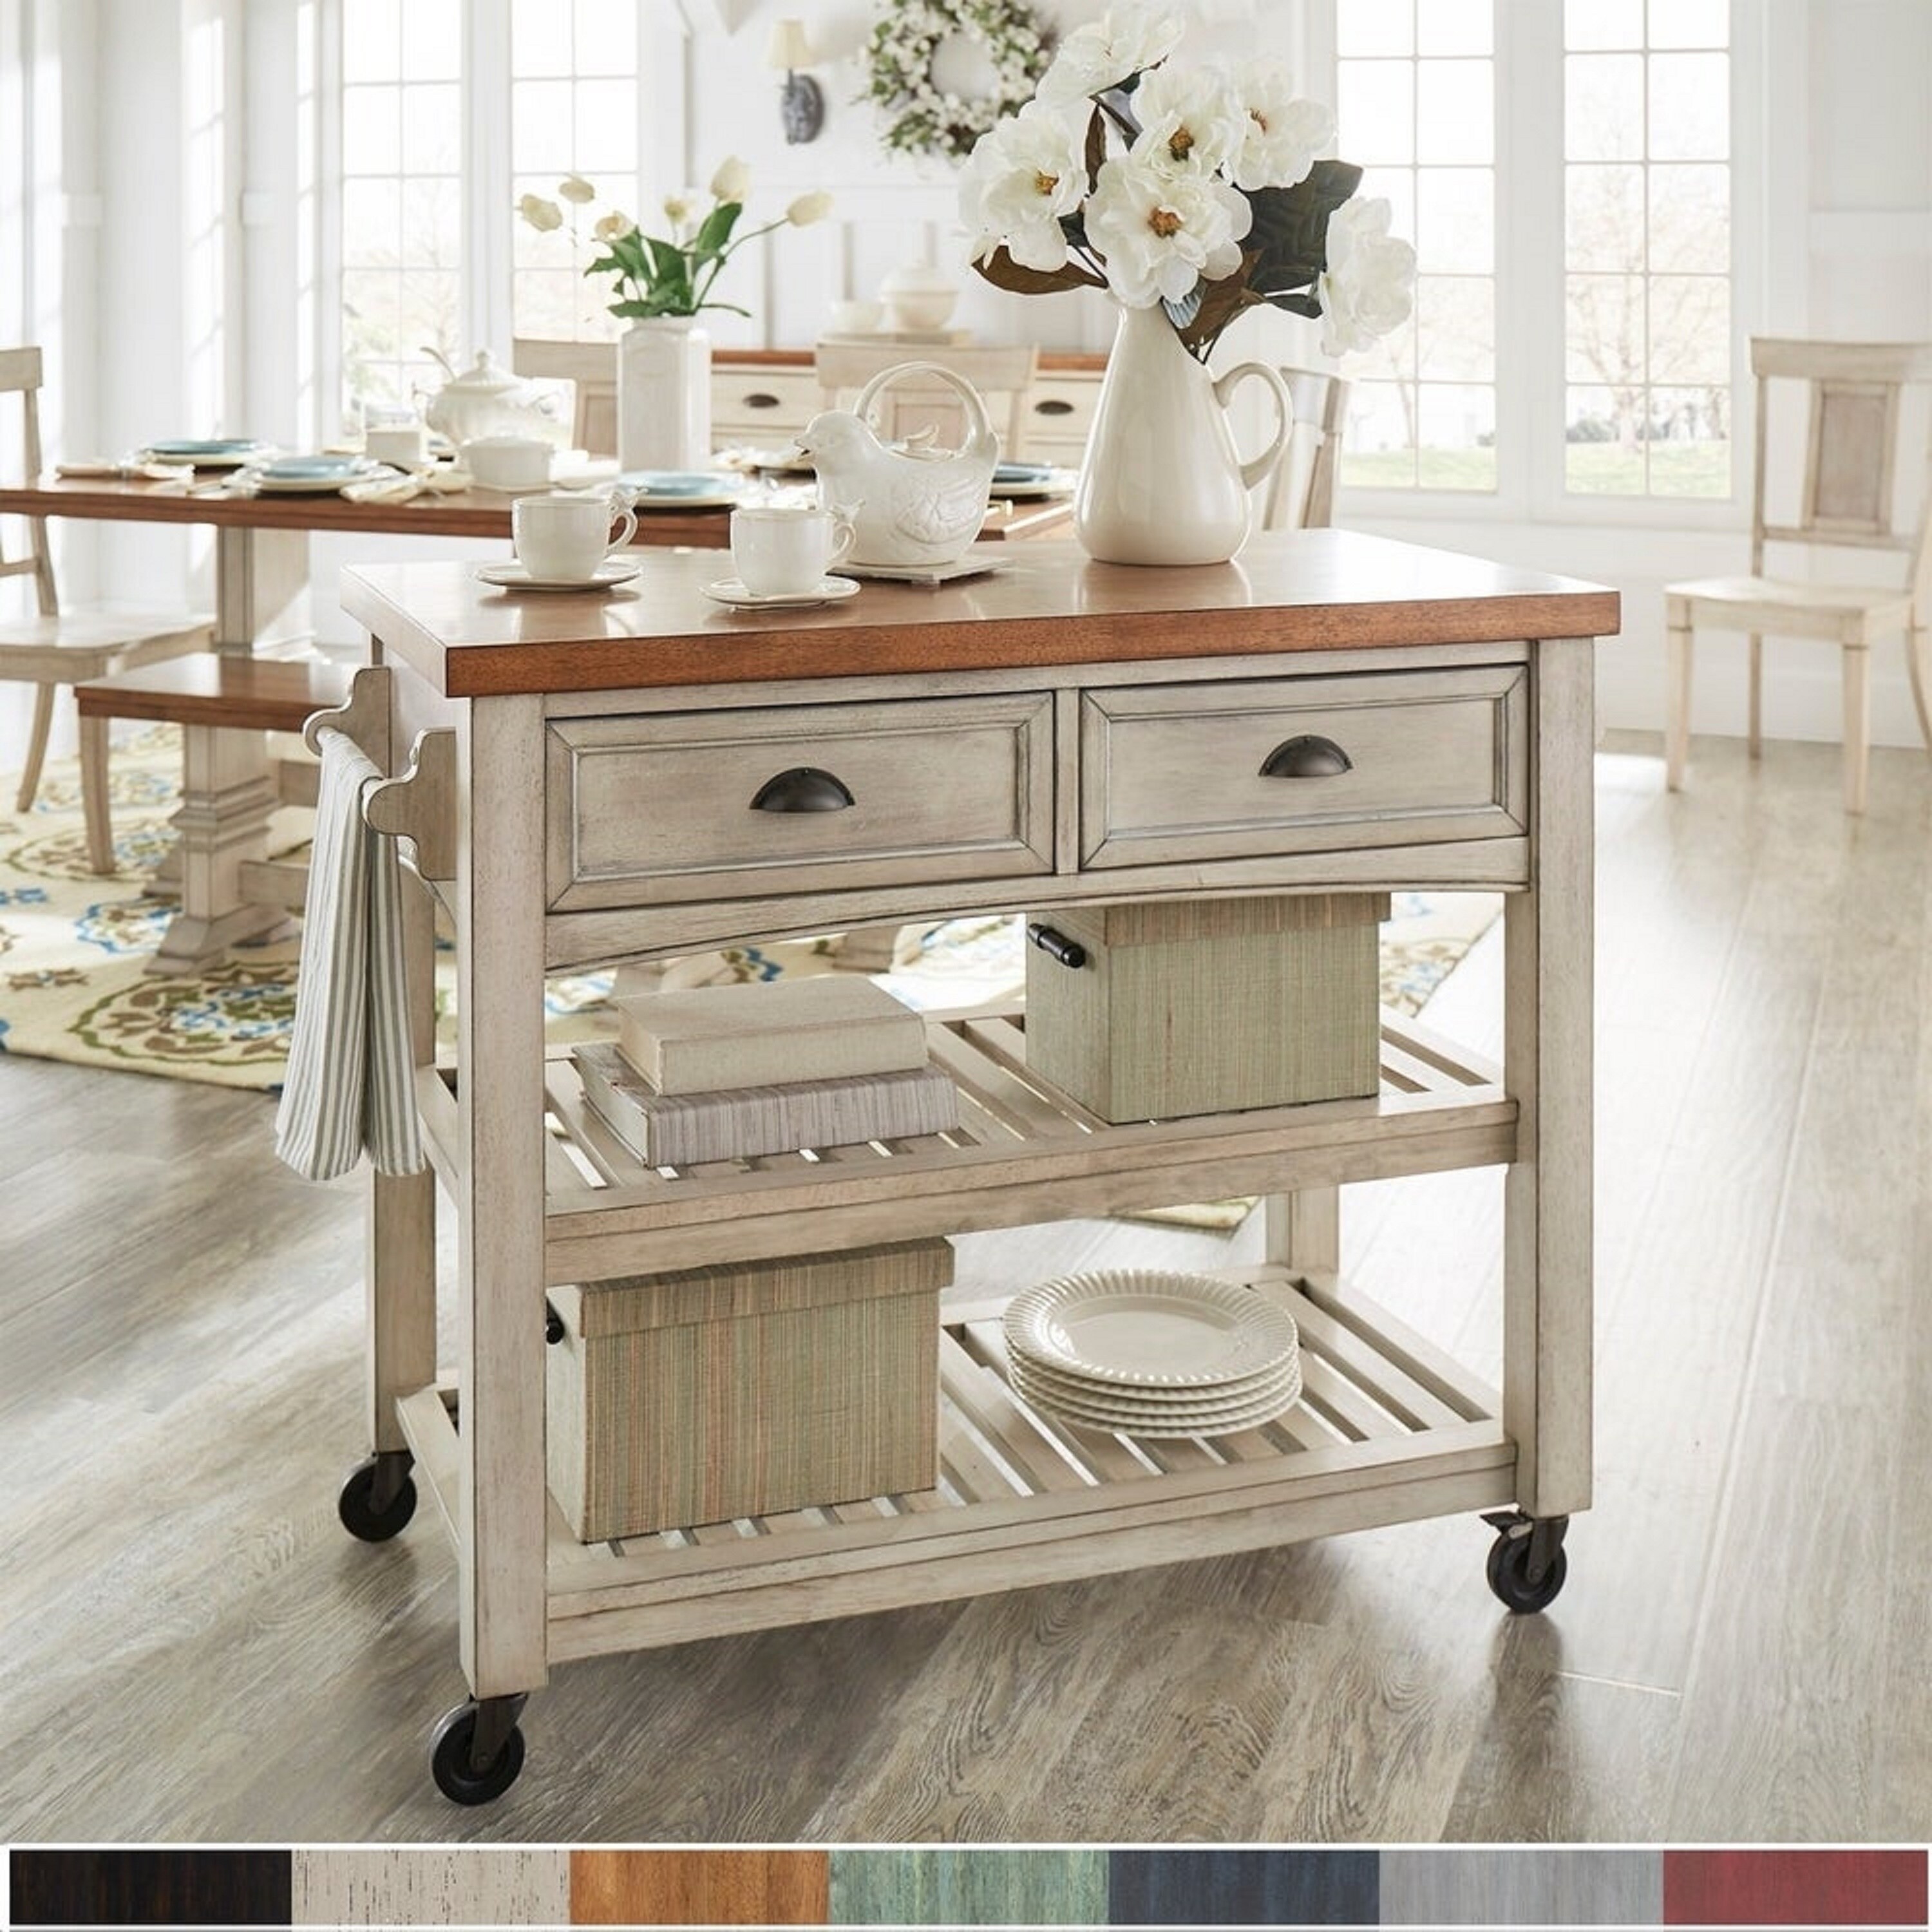 https://ak1.ostkcdn.com/images/products/is/images/direct/b5f8506daba851605c1beb0e83bada69ef798387/Eleanor-Two-Tone-Rolling-Kitchen-Island-by-iNSPIRE-Q-Classic.jpg